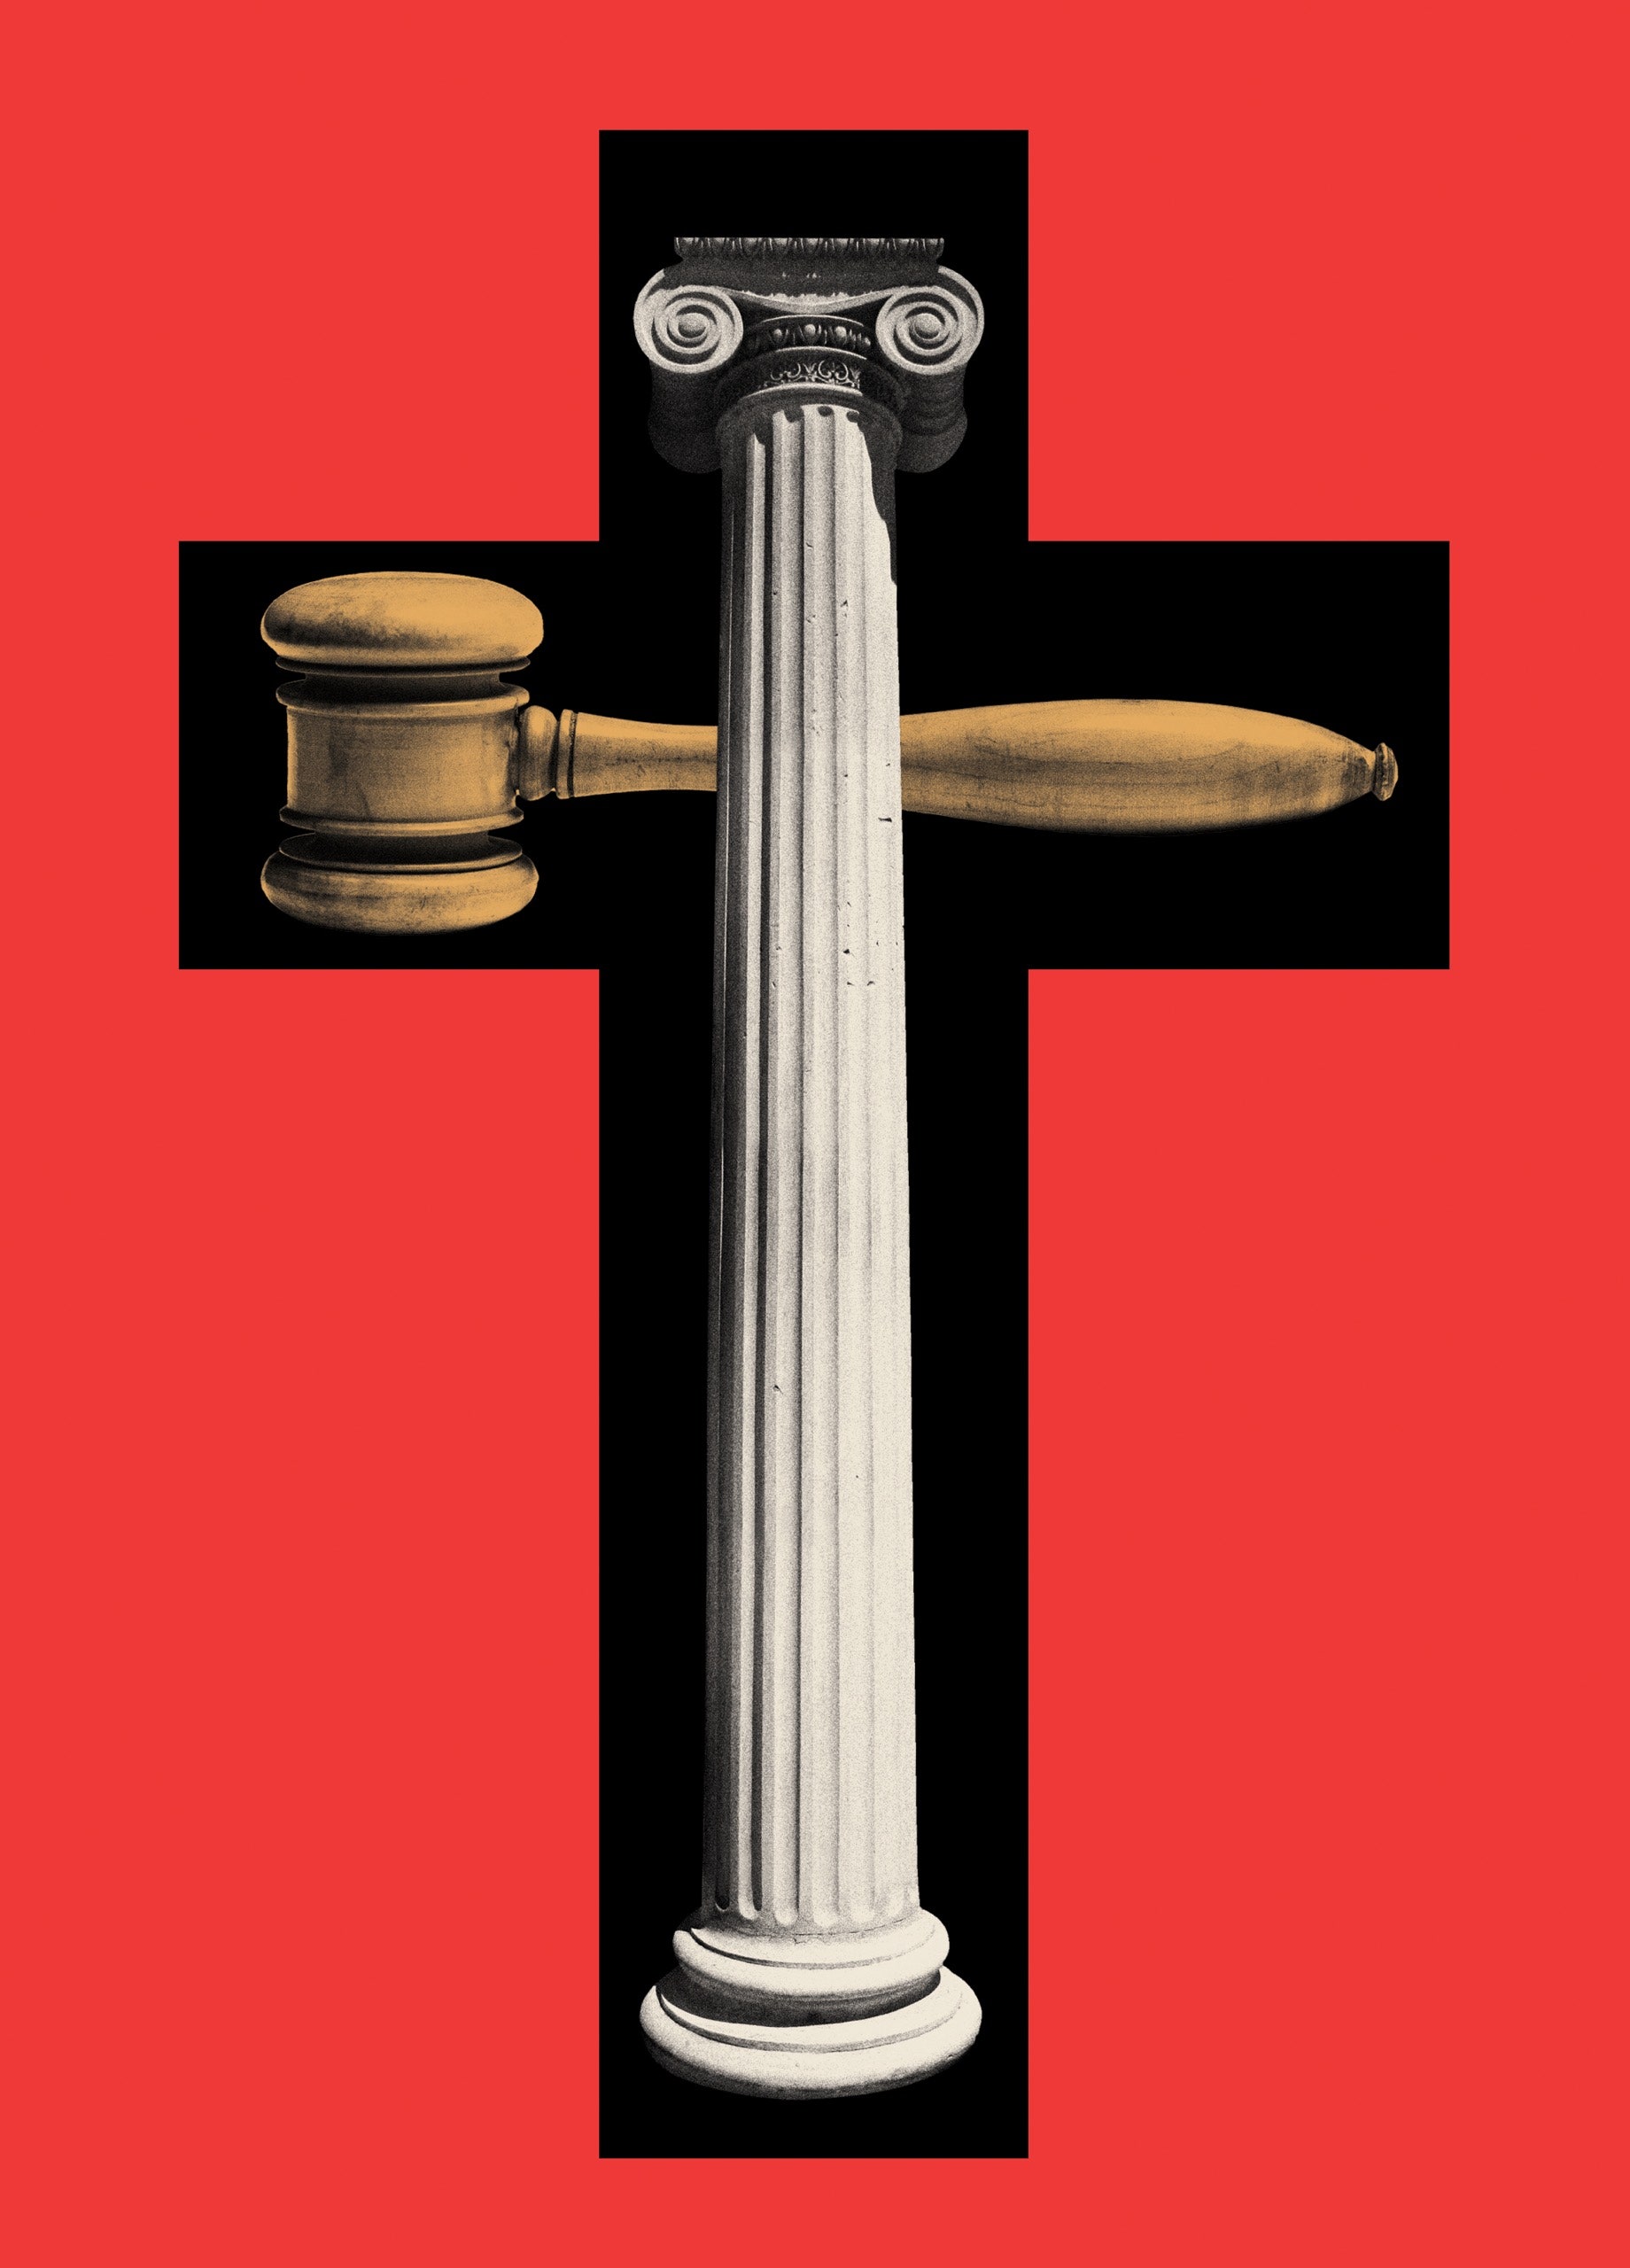 Illustration of court items arranged in a cross, Credit Joan Wong, Getty